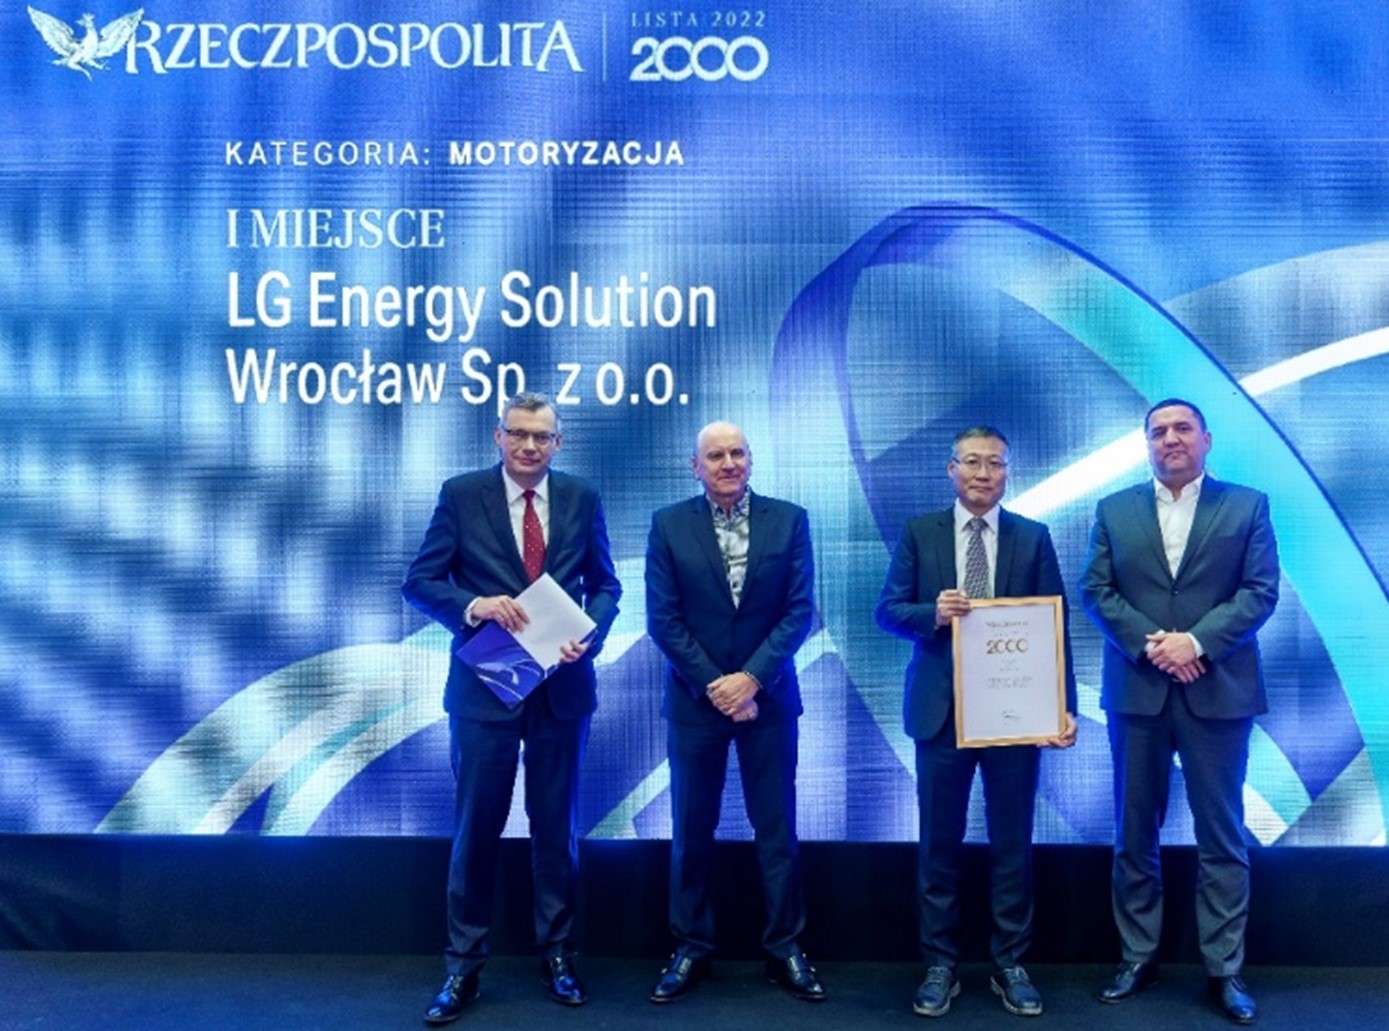 lg-energy-solution-wroclaw-named-top-10-contributor-to-polish-economy-no-1-contributor-in-automotive-sector_1.jpg